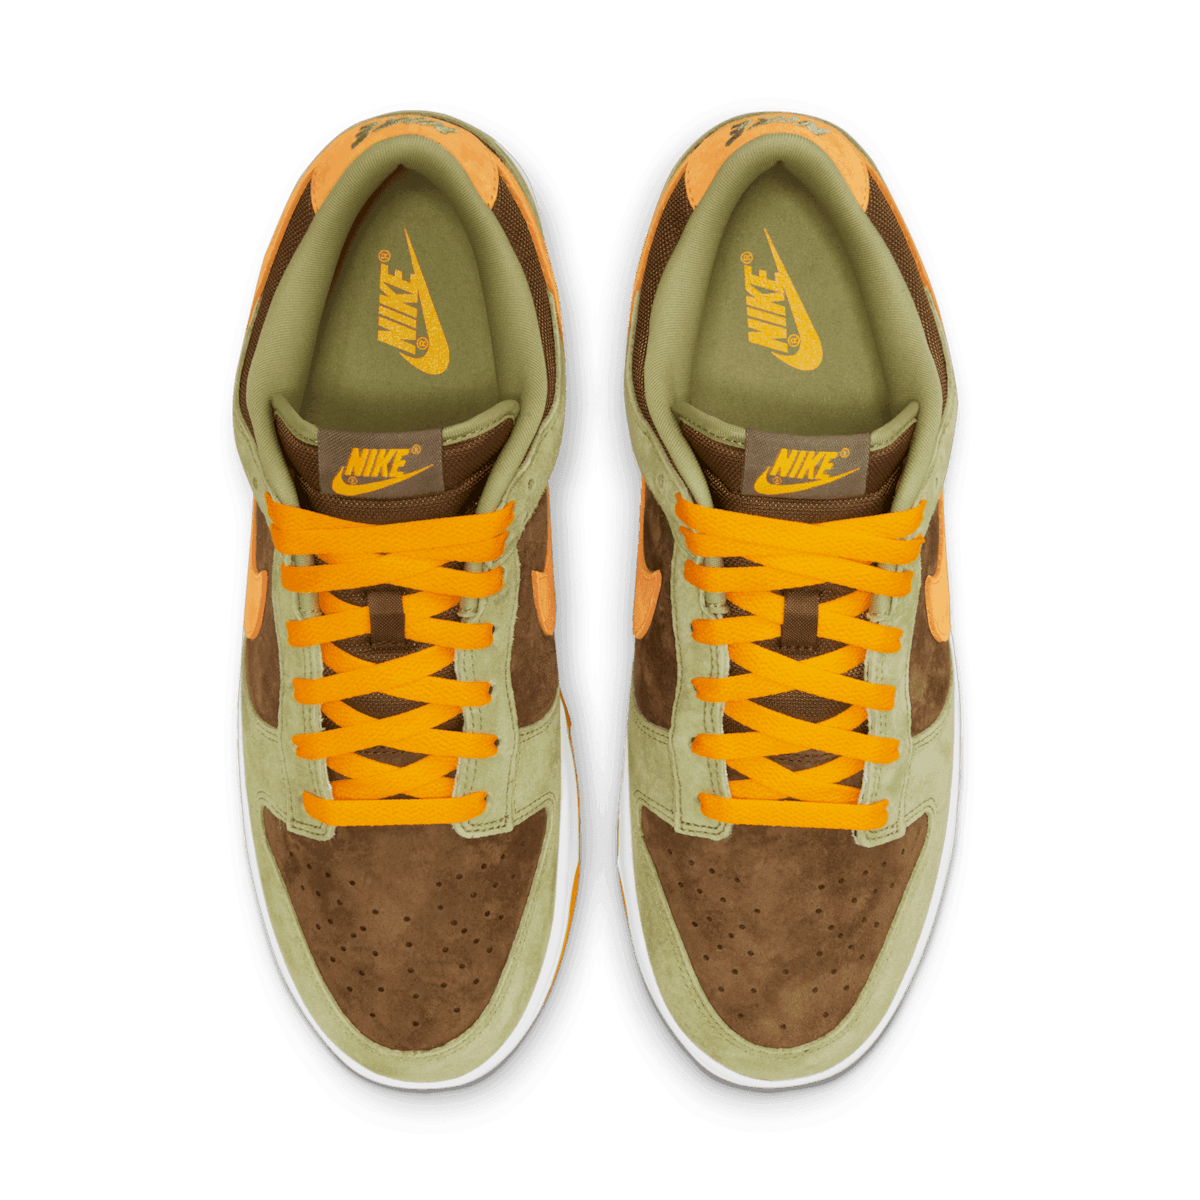 Nike Dunk Low Dusty Olive - DH5360-300 Raffles and Release Date